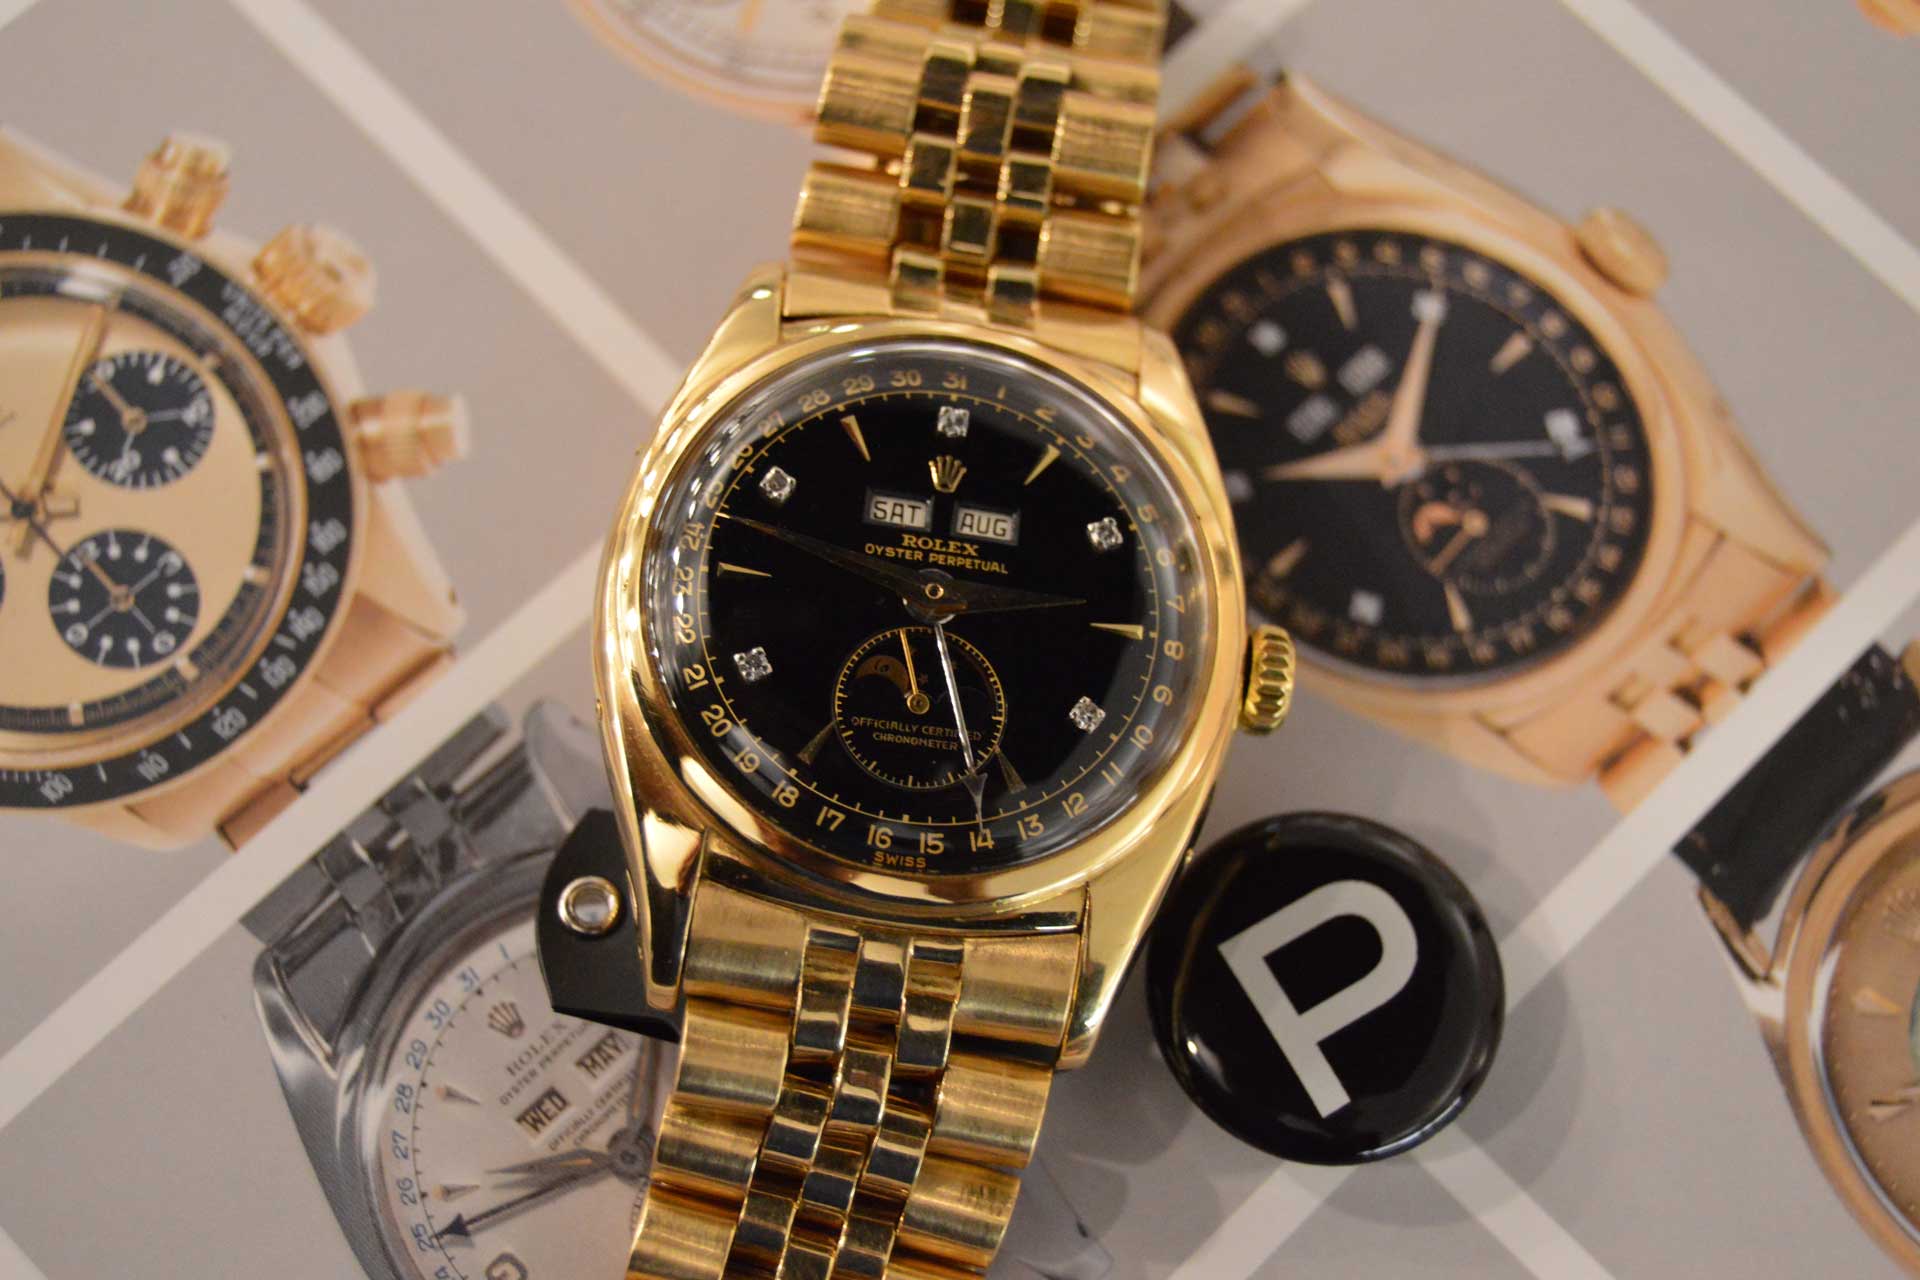 Let’s talk about the Rolex that sold for HK$39.4 million